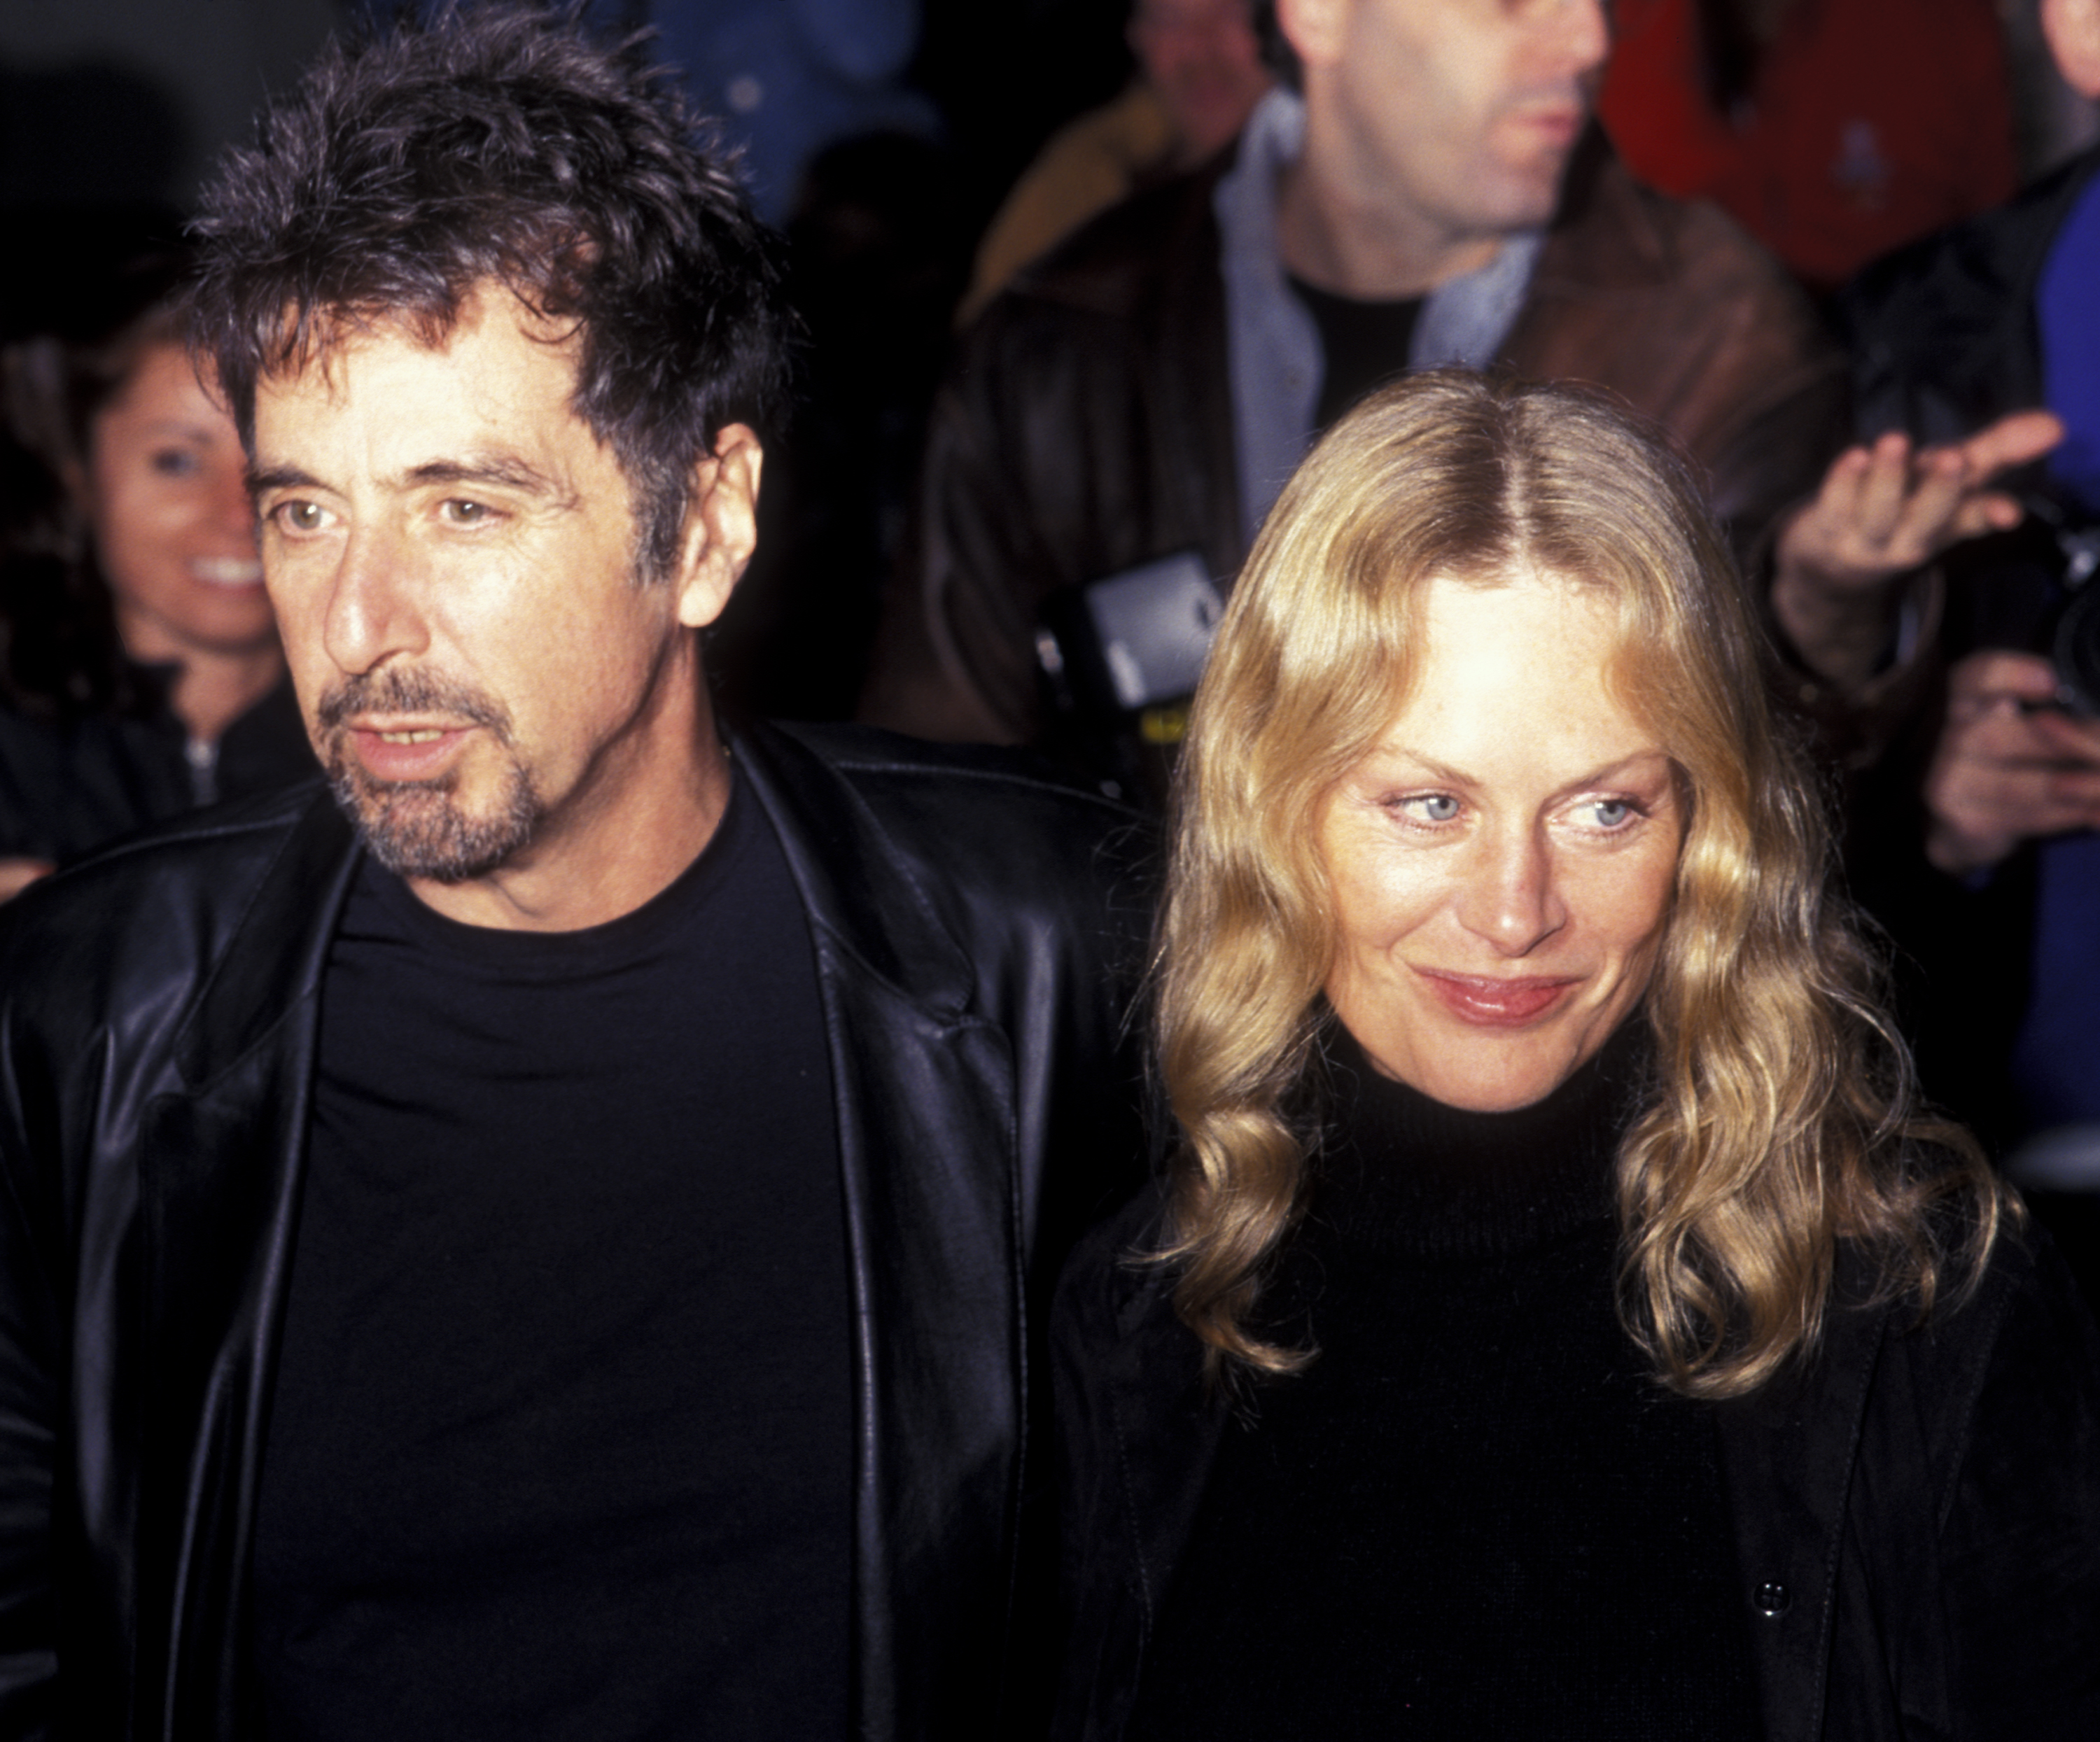 Al Pacino and Beverly D'Angelo at "The Insider" premiere in New York City, 1999 | Source: Getty Images